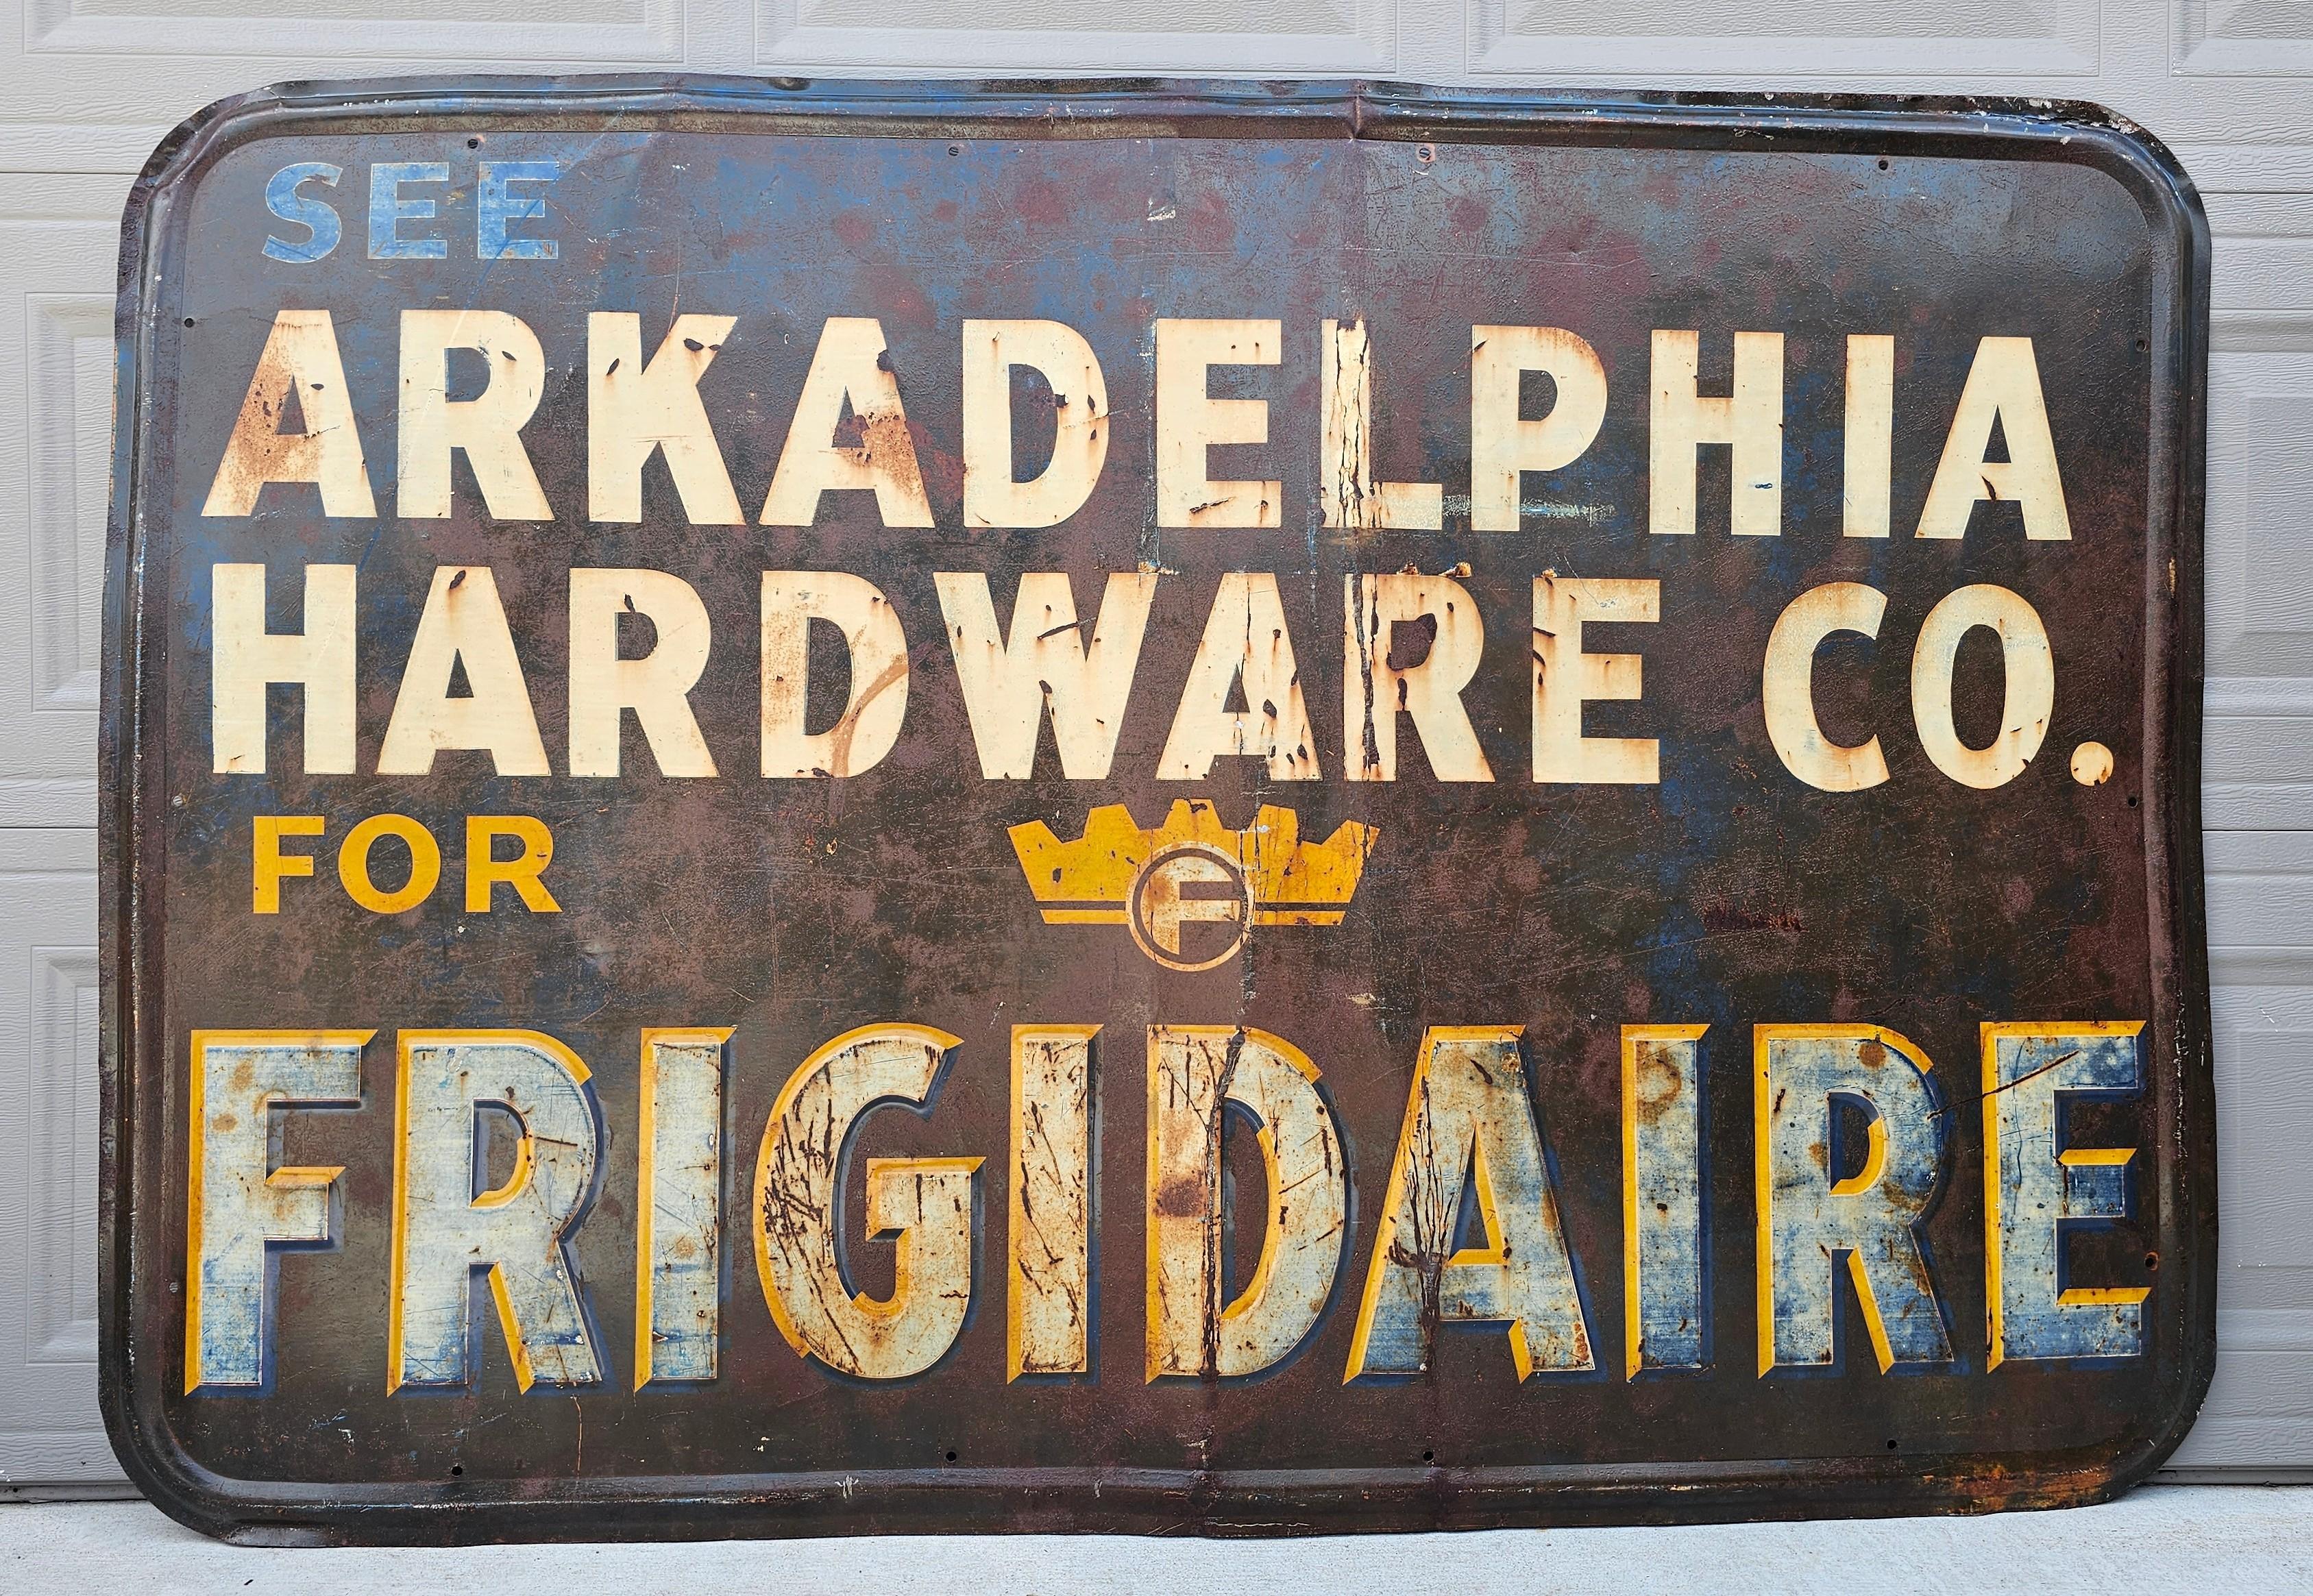 A scarce, likely one-of-a-kind, antique American Frigidaire enameled metal advertising sign, early 20th century, period Art Deco styling, the sign reads: 